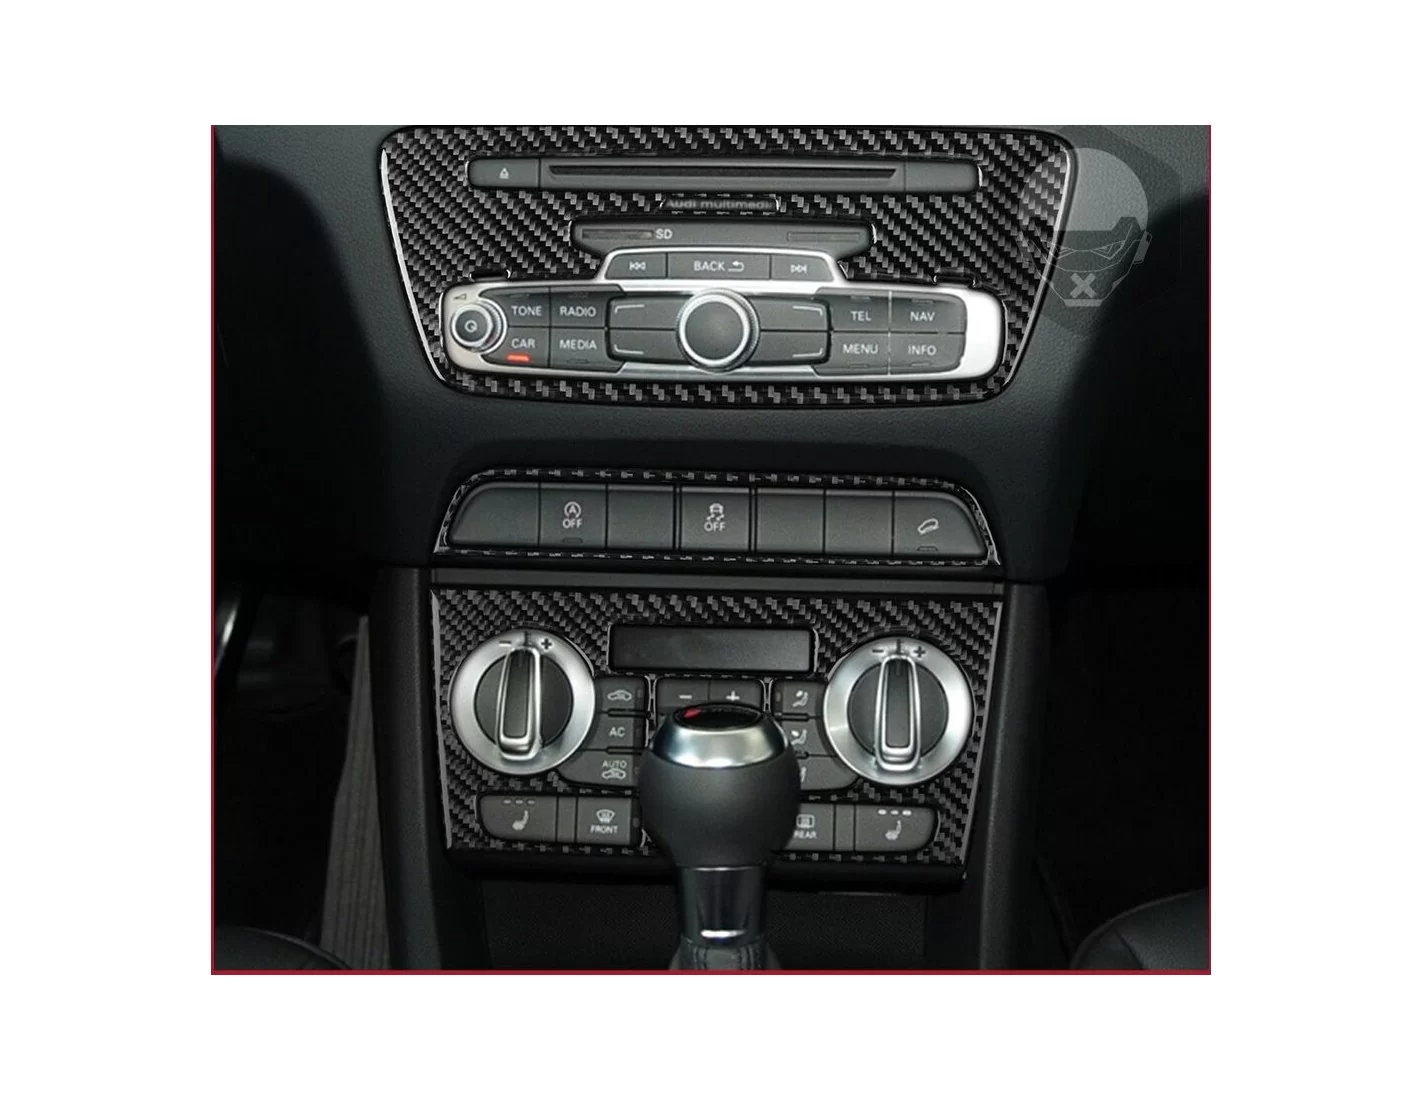 Car Styling Accessories Automobile Gear Panel Decorative Stickers For Audi  Q3 2015-2023